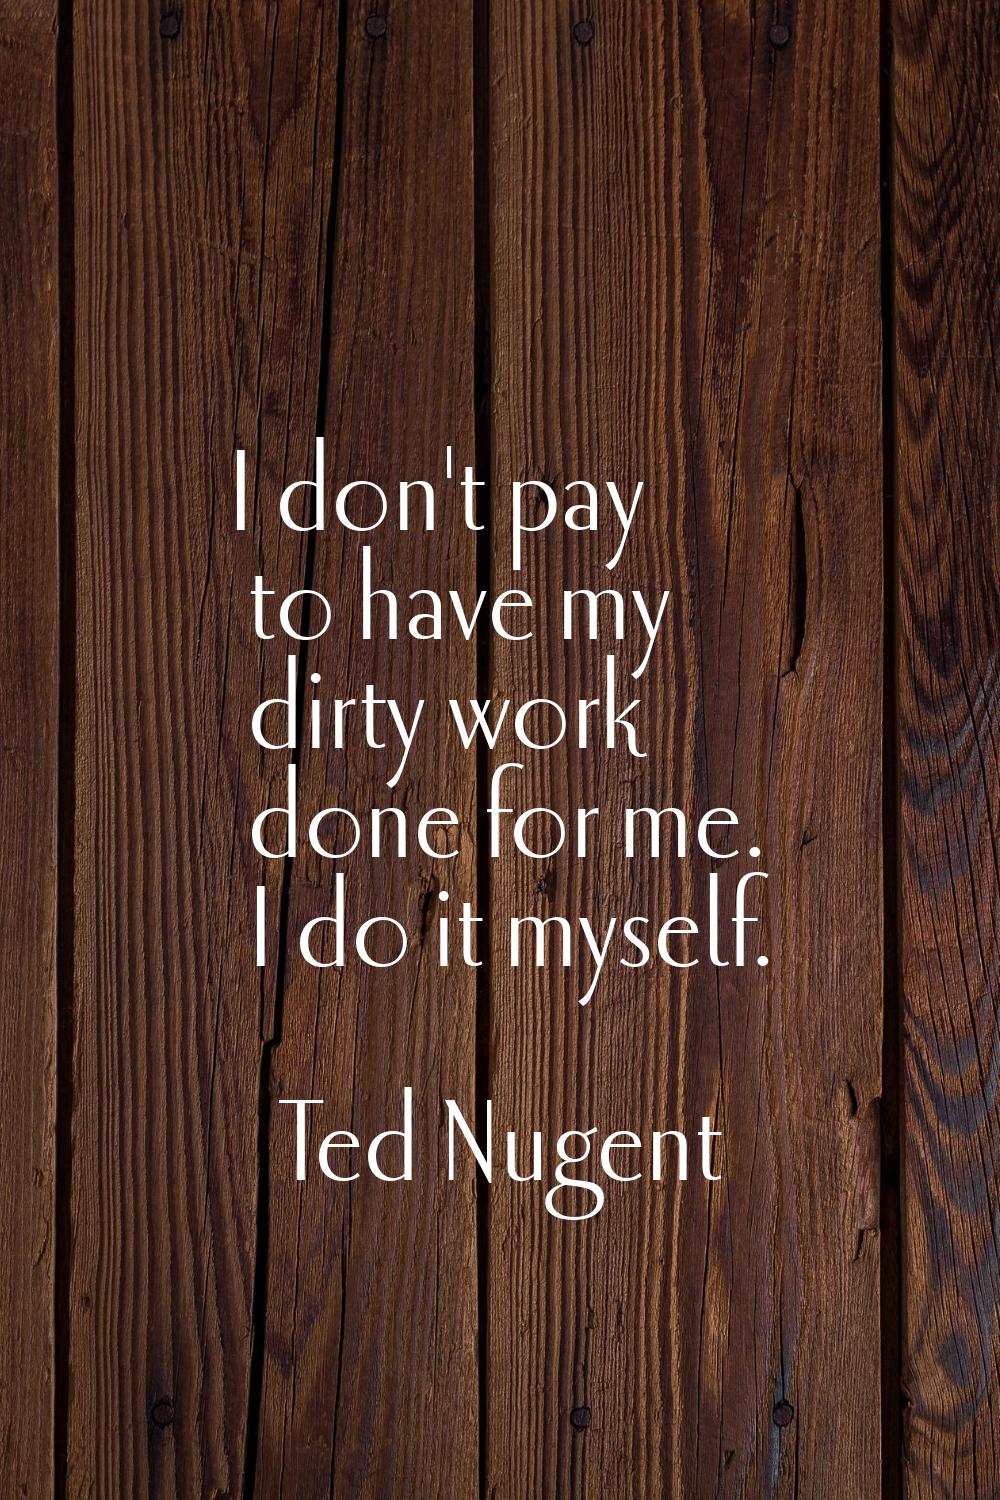 I don't pay to have my dirty work done for me. I do it myself.